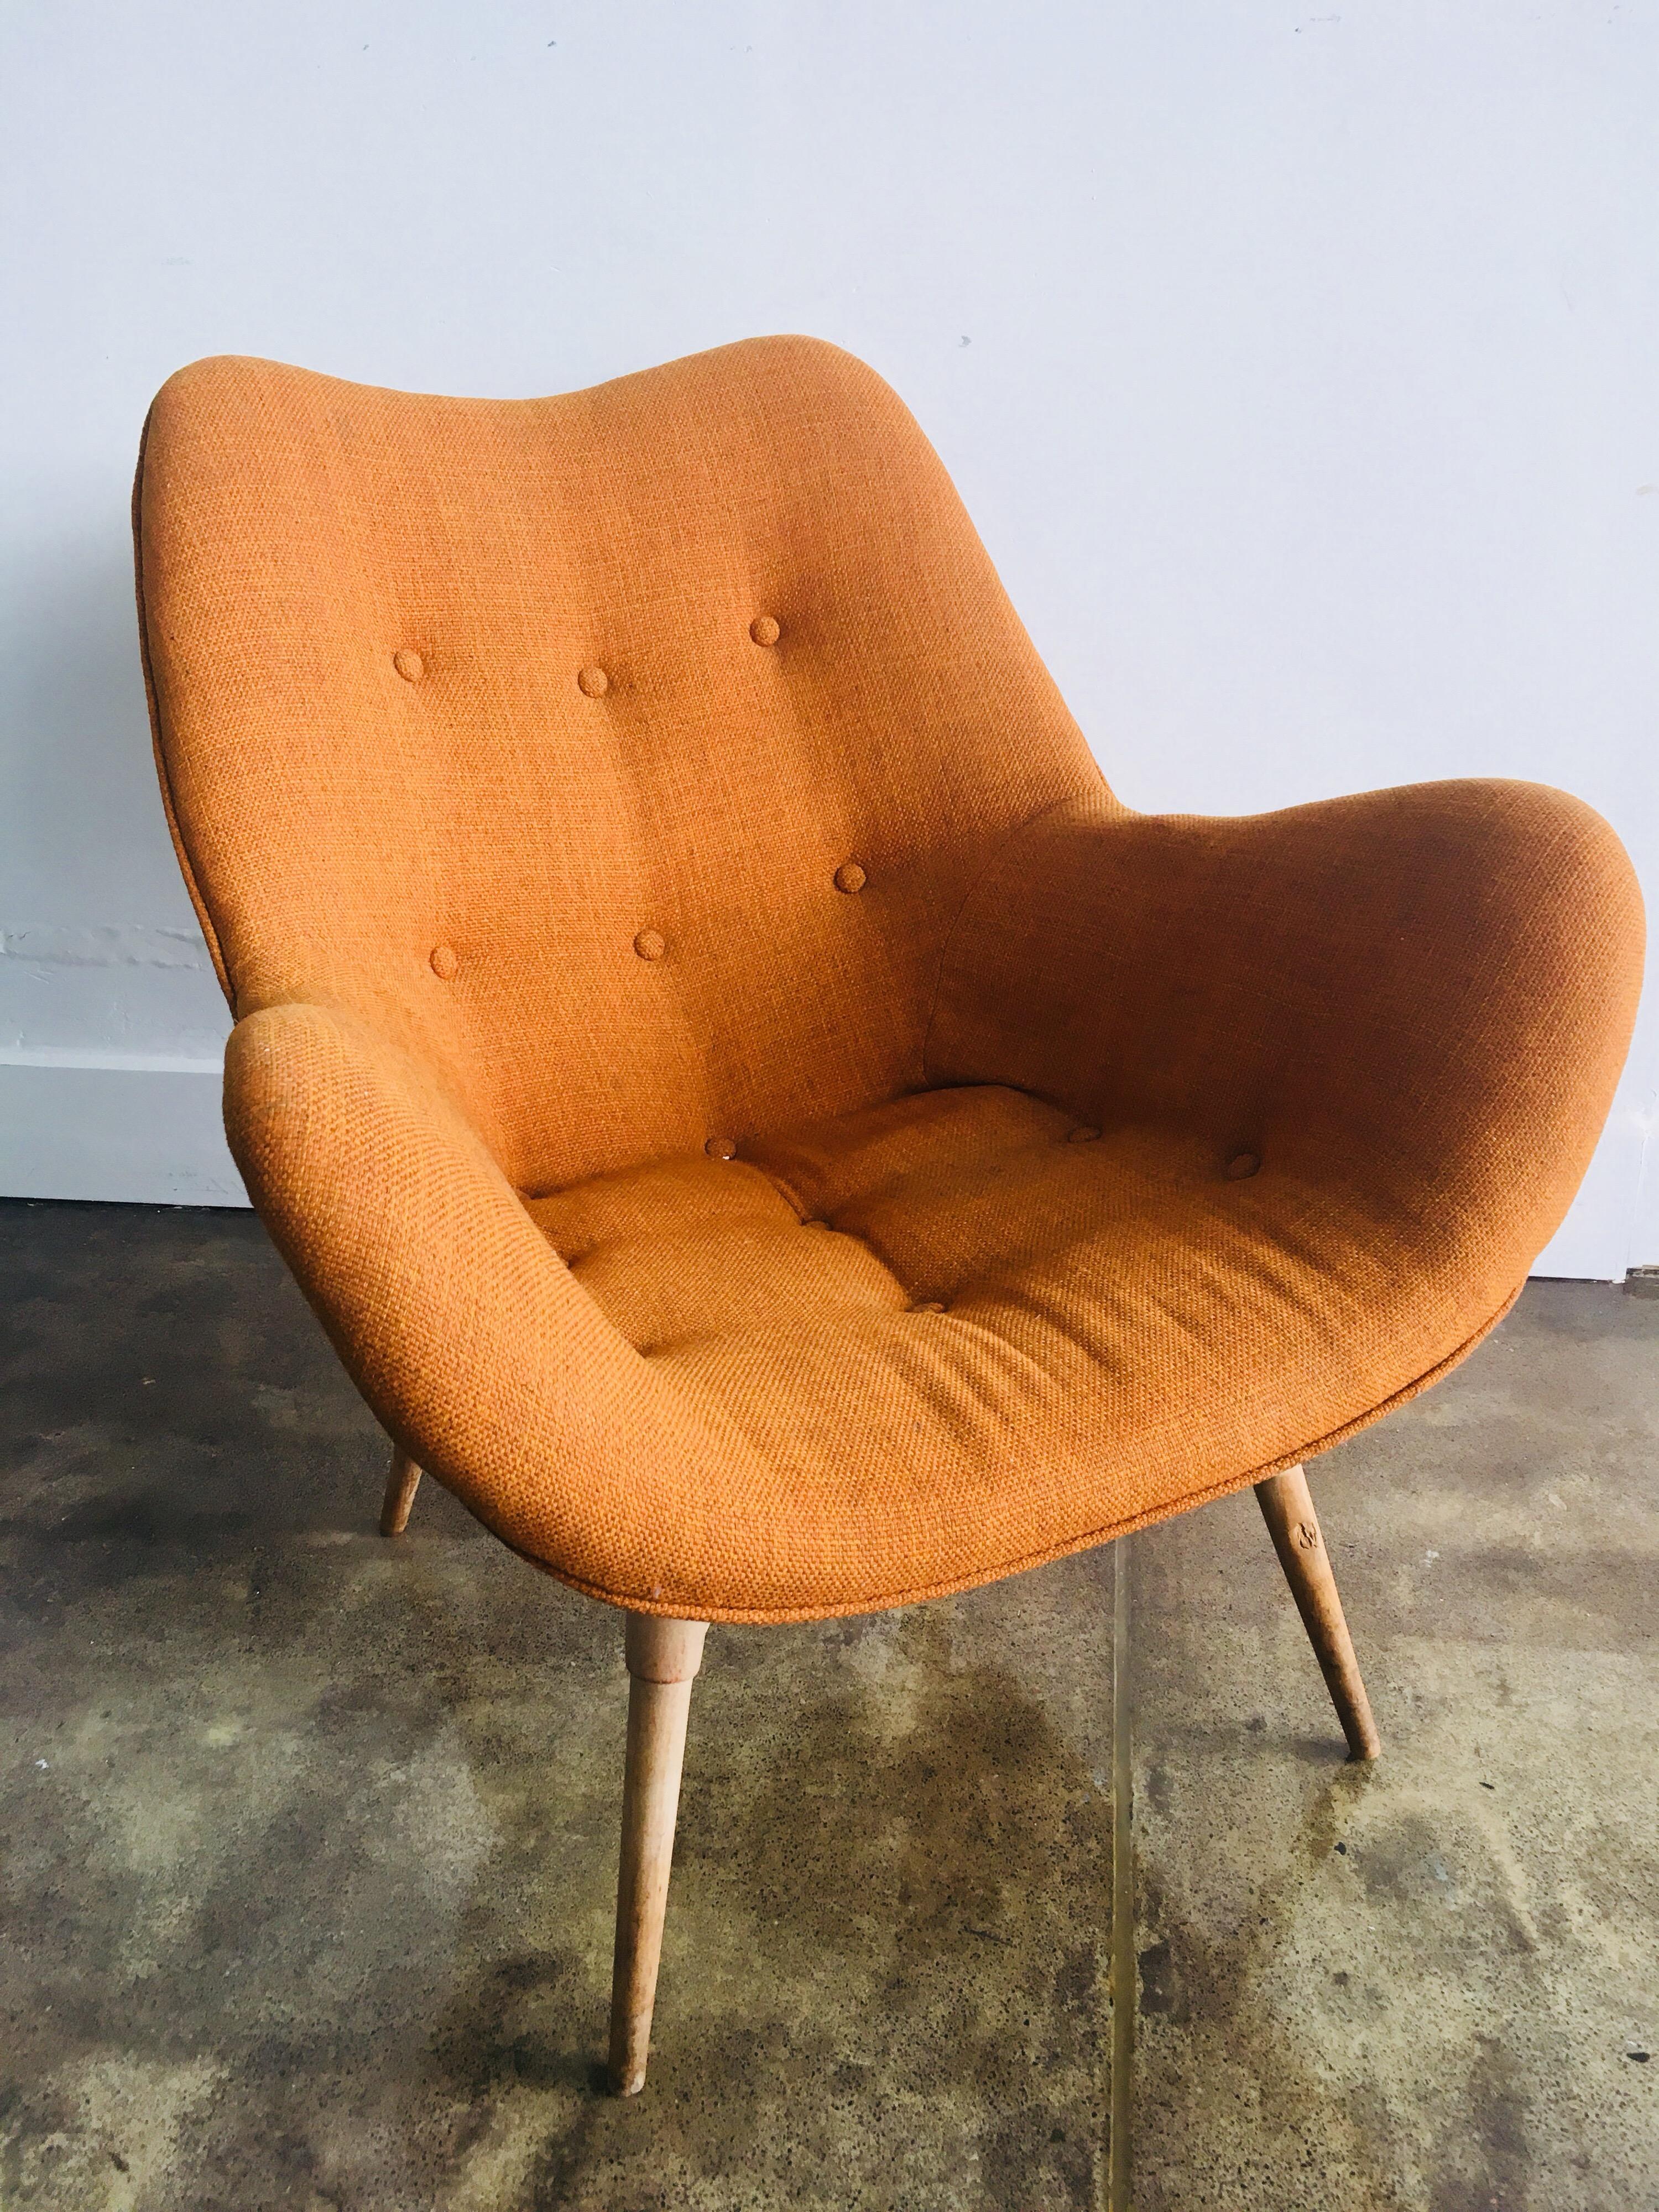 B210 TV Contour chairs, circa 1960s by renowned Australian designer Grant Featherston. In good original condition, wear commensurate with age. An iconic and highly collectable example of midcentury Australian design. Pair available. Price listed is